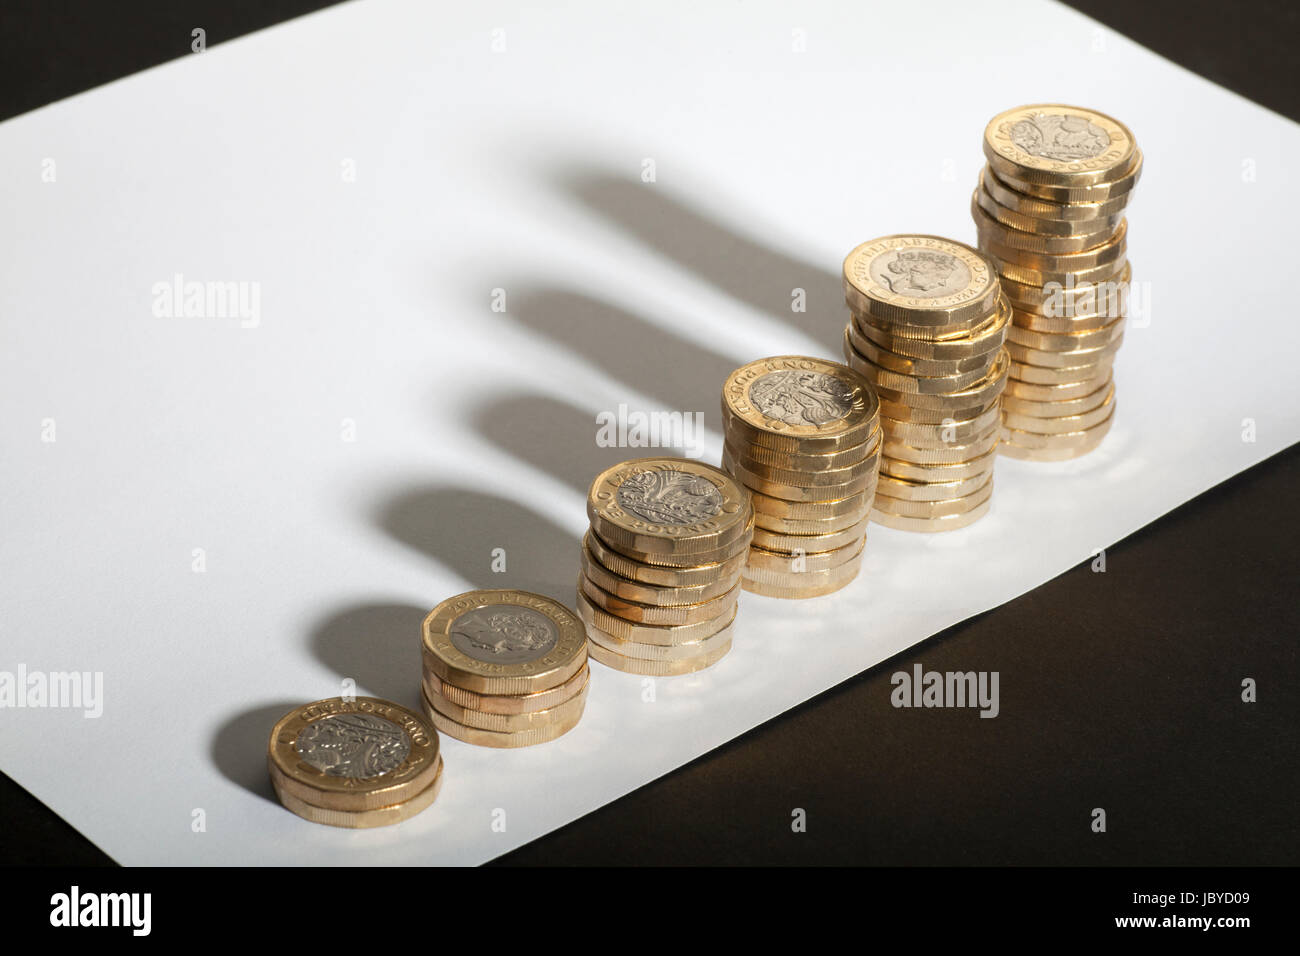 Piles of new pound coins 2016, 17, with shadows shoing investment growth. Stock Photo